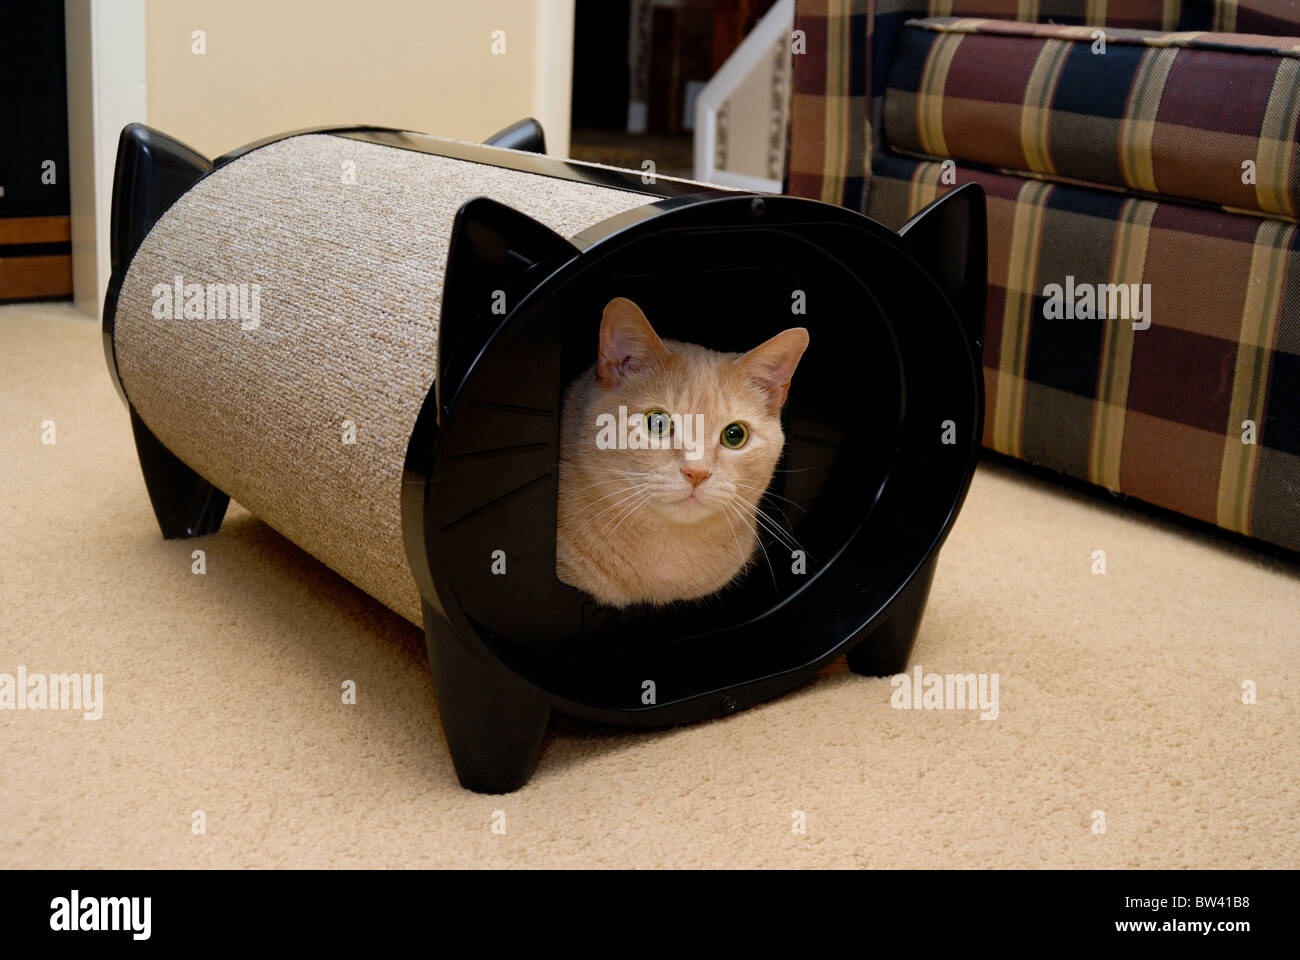 A cat sits inside a 'KatKabin' cat house or cat bed inside a home. Stock Photo